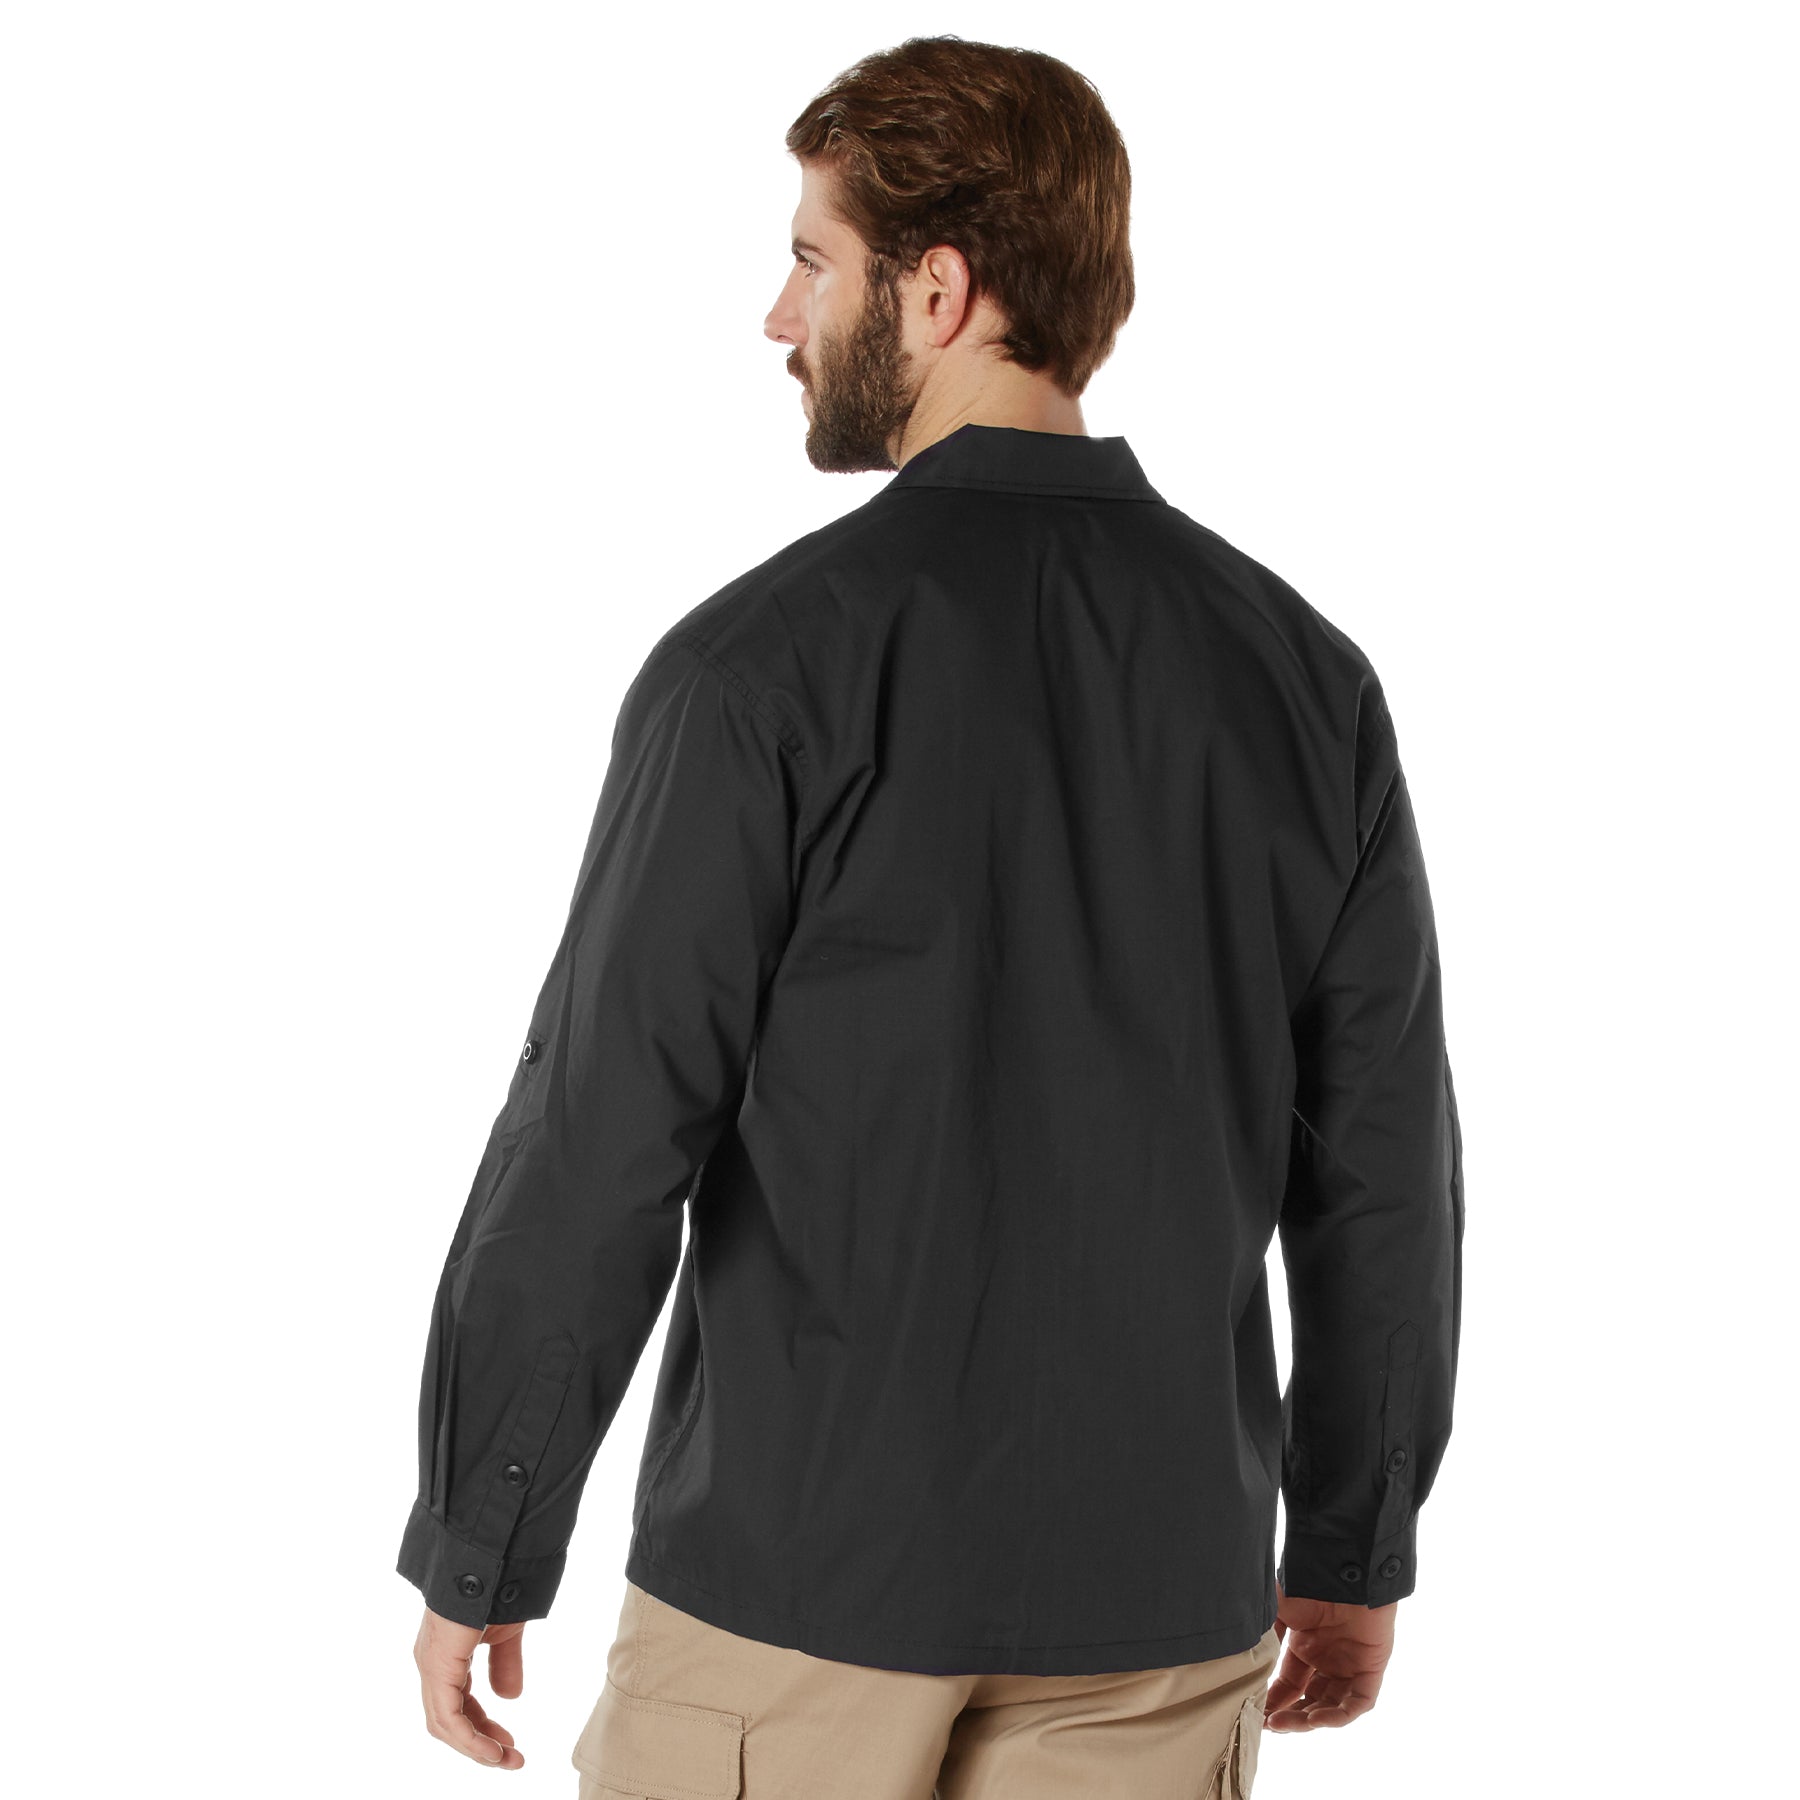 Lightweight Poly/Cotton Rip-Stop Tactical Shirts